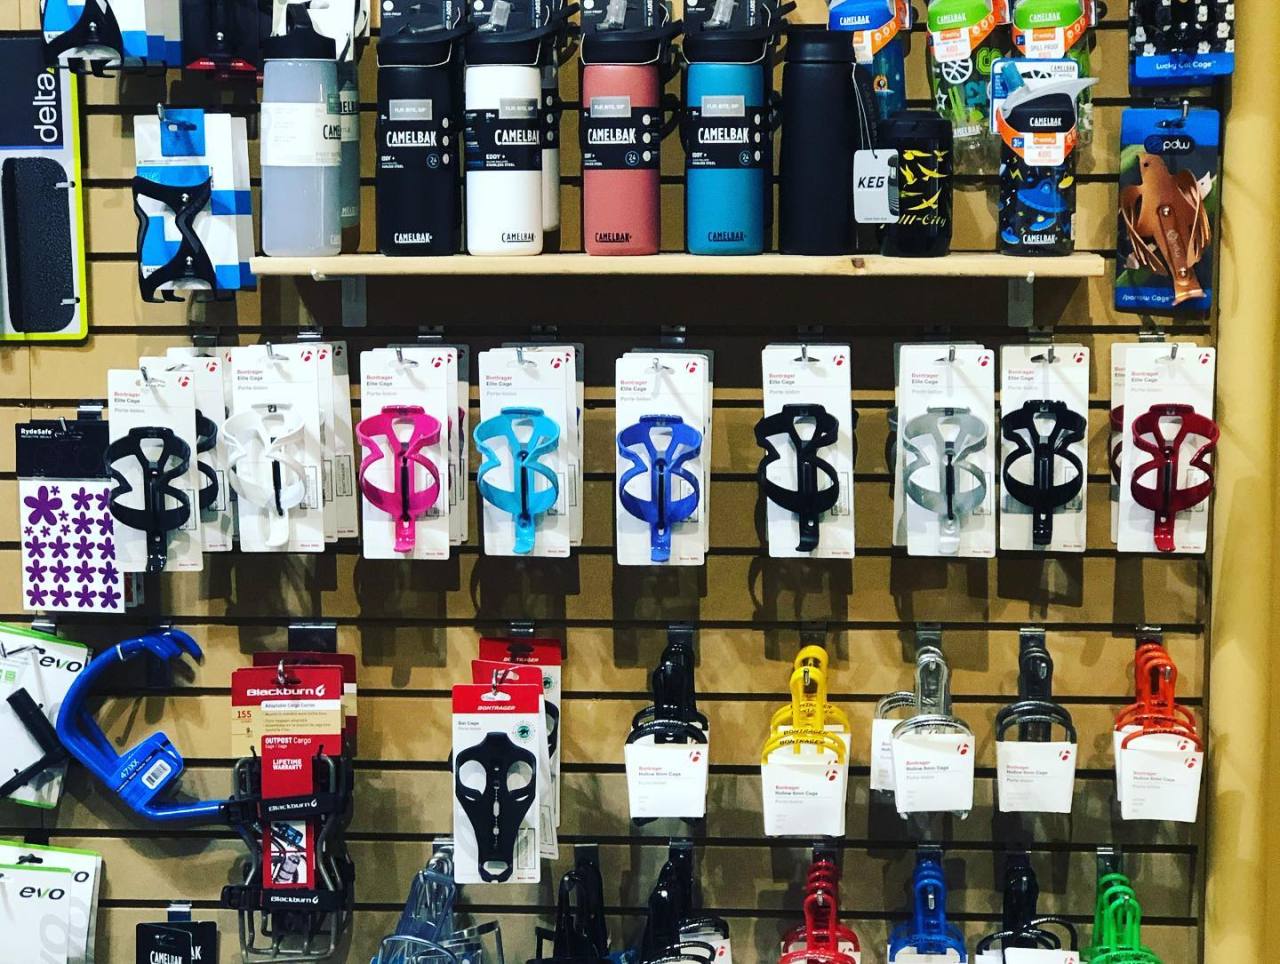 Stocking stuffers for the cyclists in your family!   Lights, locks, cages, lube, tools, bags & much much more!!   Psst….tell all your friends.  https://ift.tt/3Fh1wpN  #shoplocal #downtownbelleville #downtowndistrict #yourlocalbikeshop #alliwantforchristmasisanewbike #nicelist — view on Instagram https://ift.tt/3El3WTm #Instagram#IFTTT